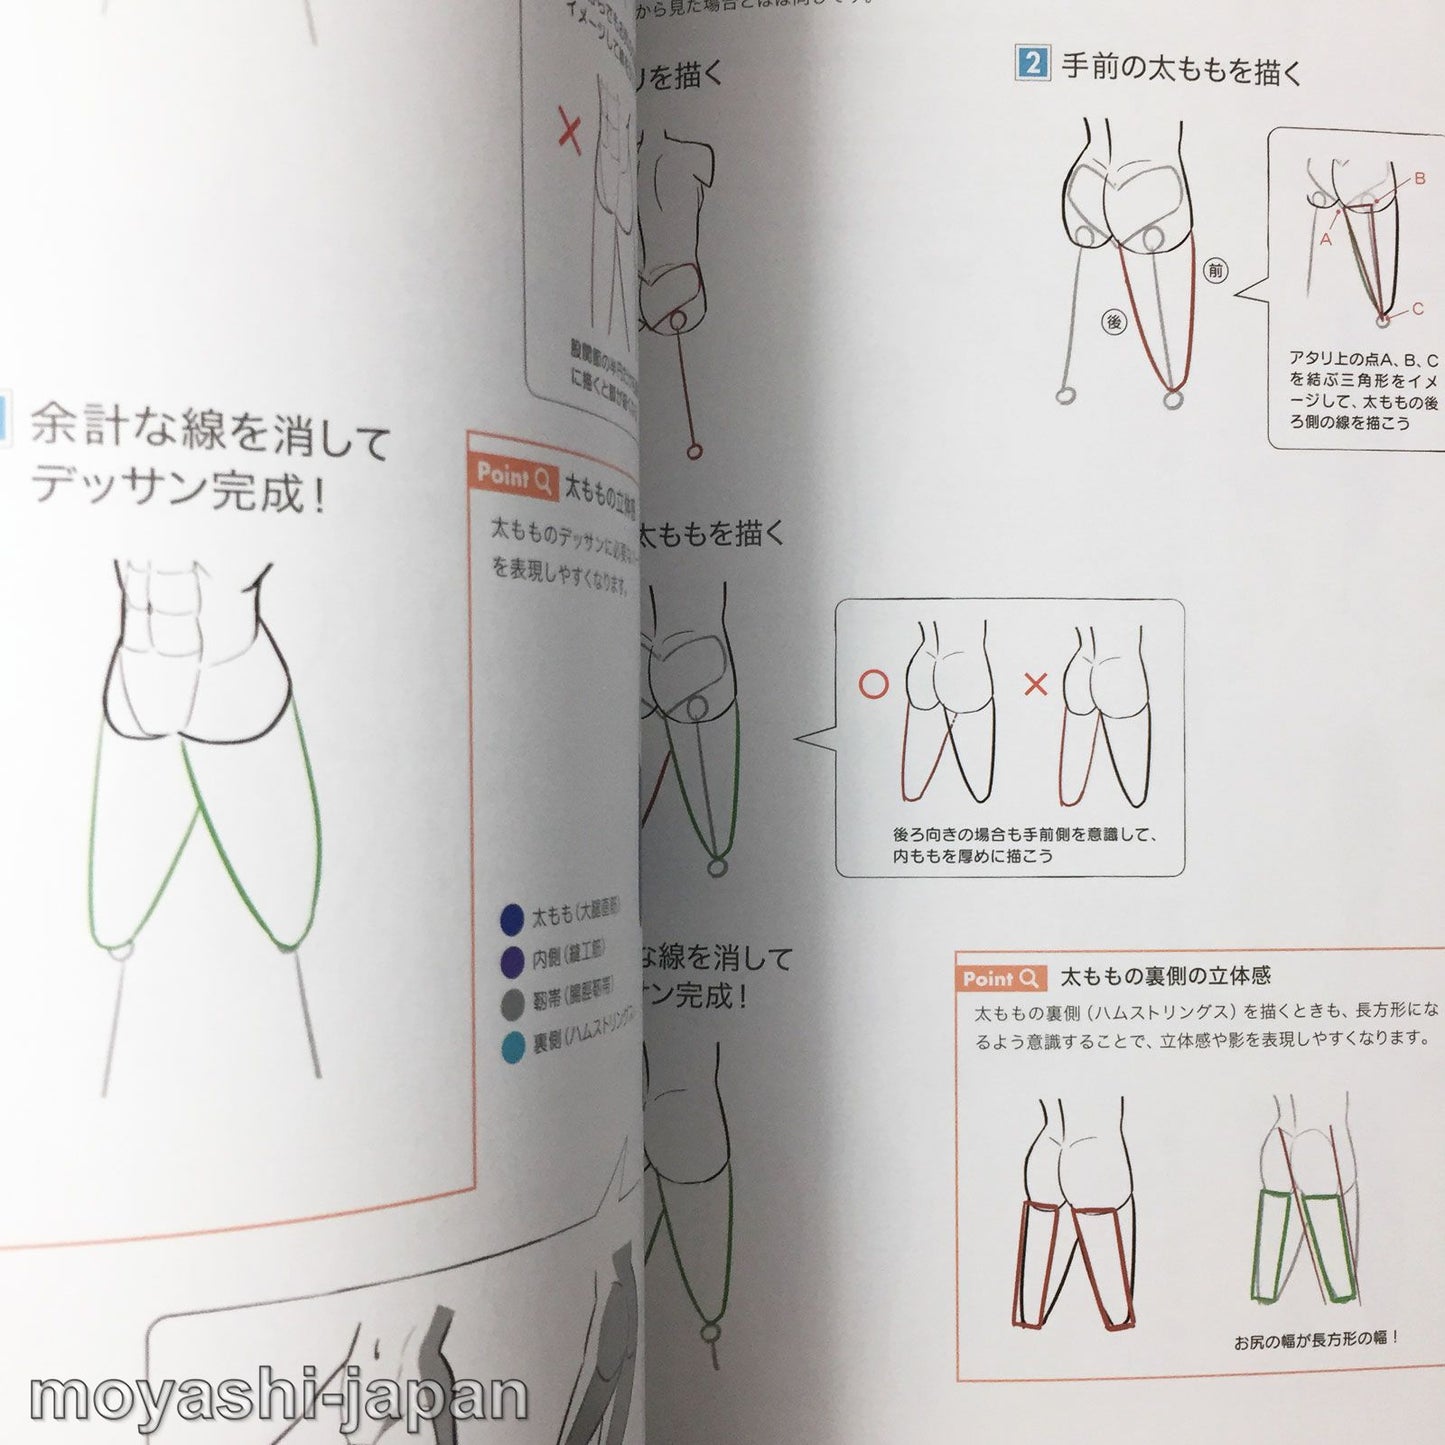 Encyclopedia of How To Draw the "Body" of Digital Illustration